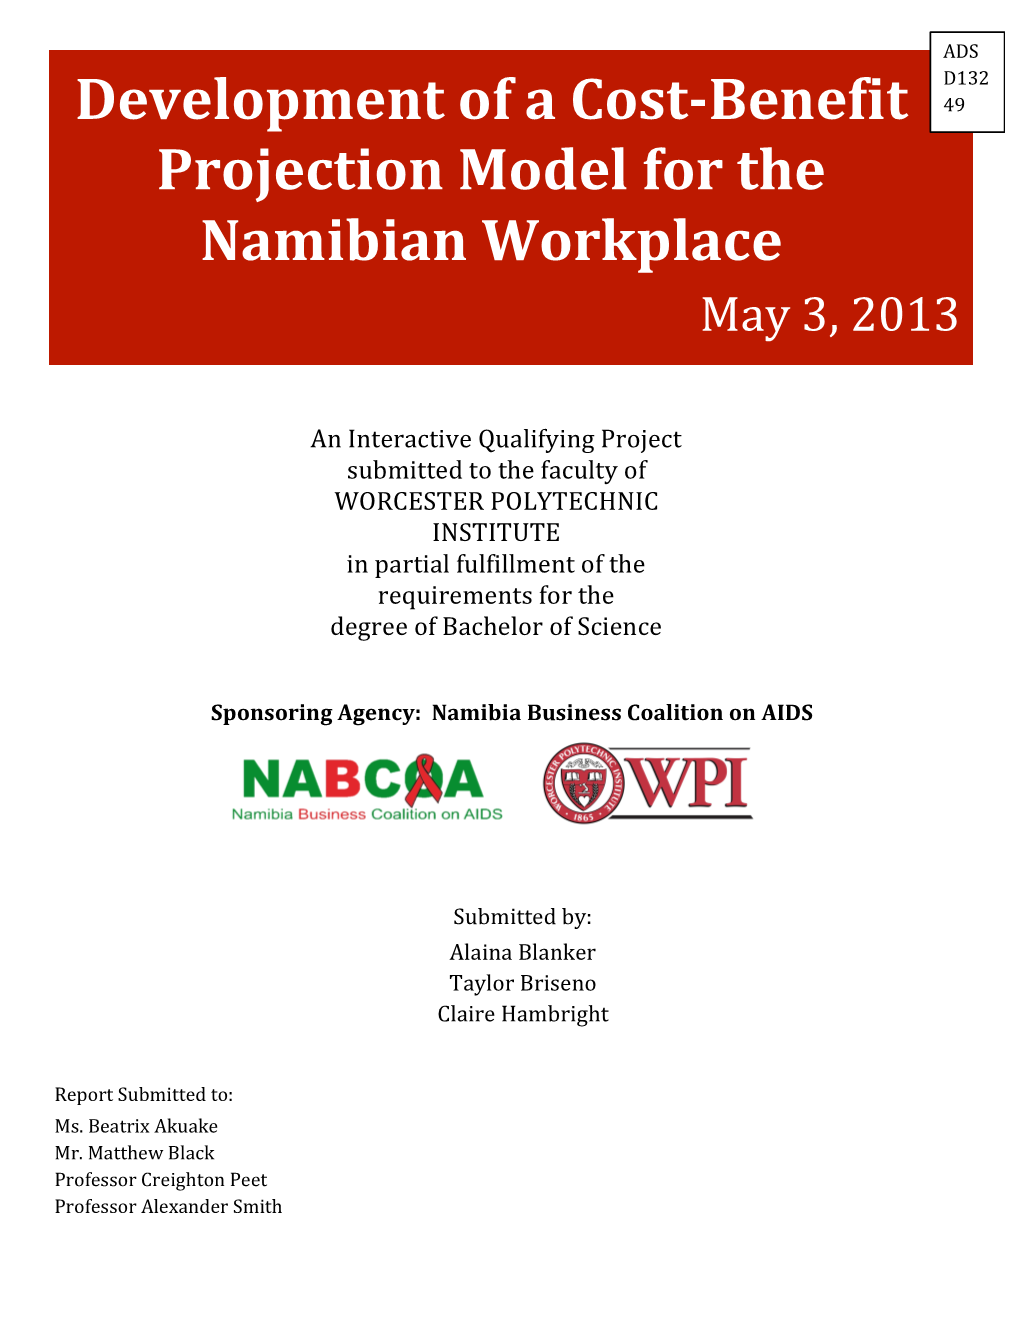 Development of a Cost-‐Benefit Projection Model for the Namibian